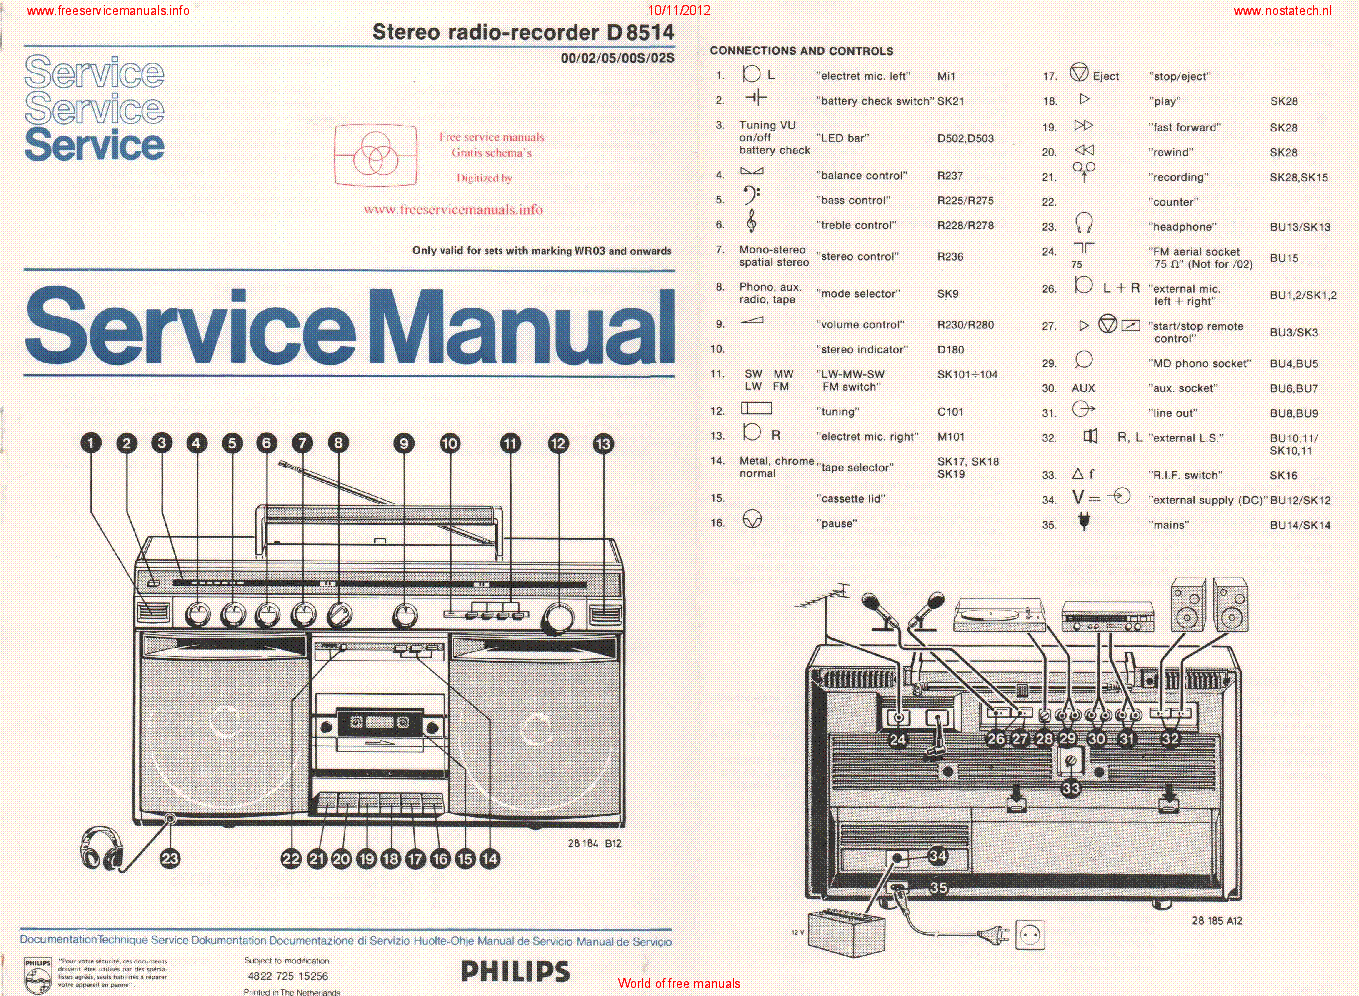 PHILIPS D8514 service manual (1st page)